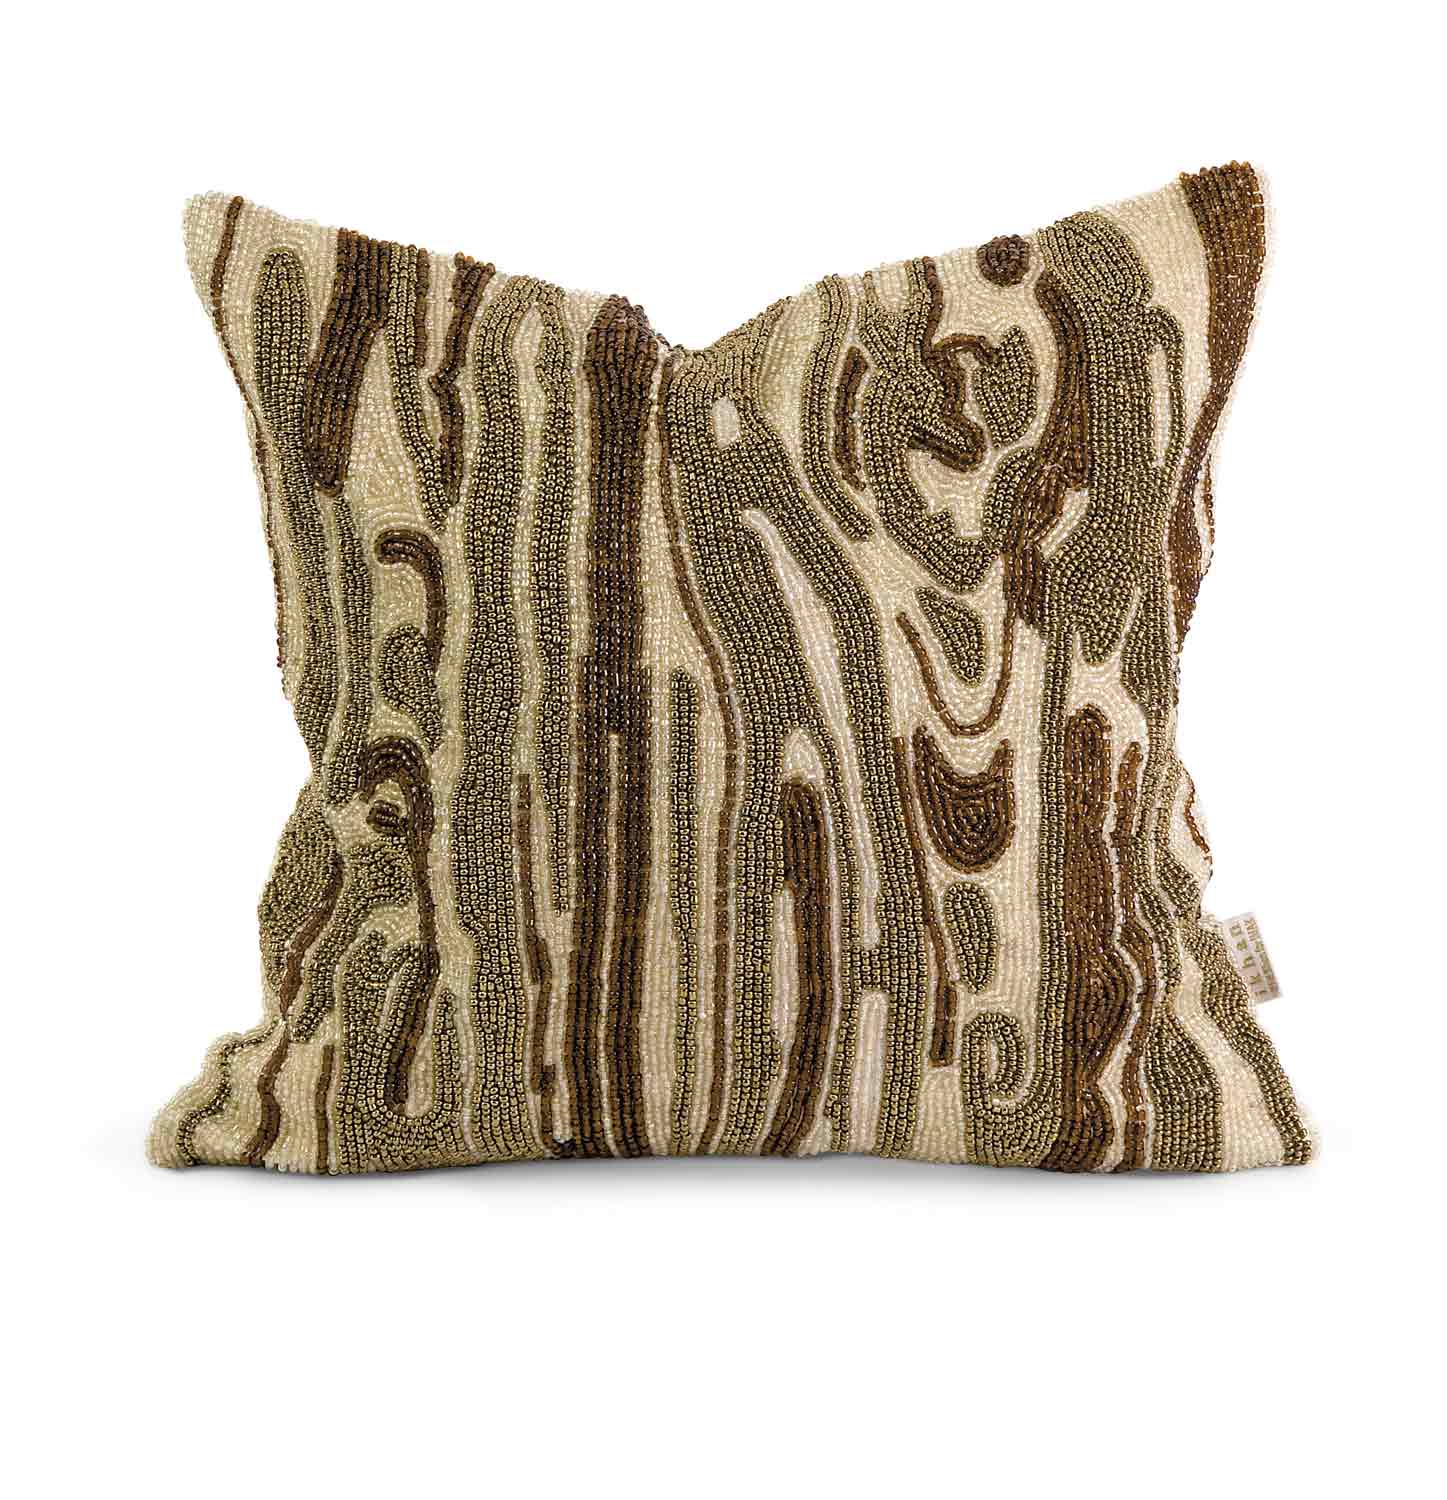 IMAX Ik Lavitra Hand Beaded Pillow with Down Fill